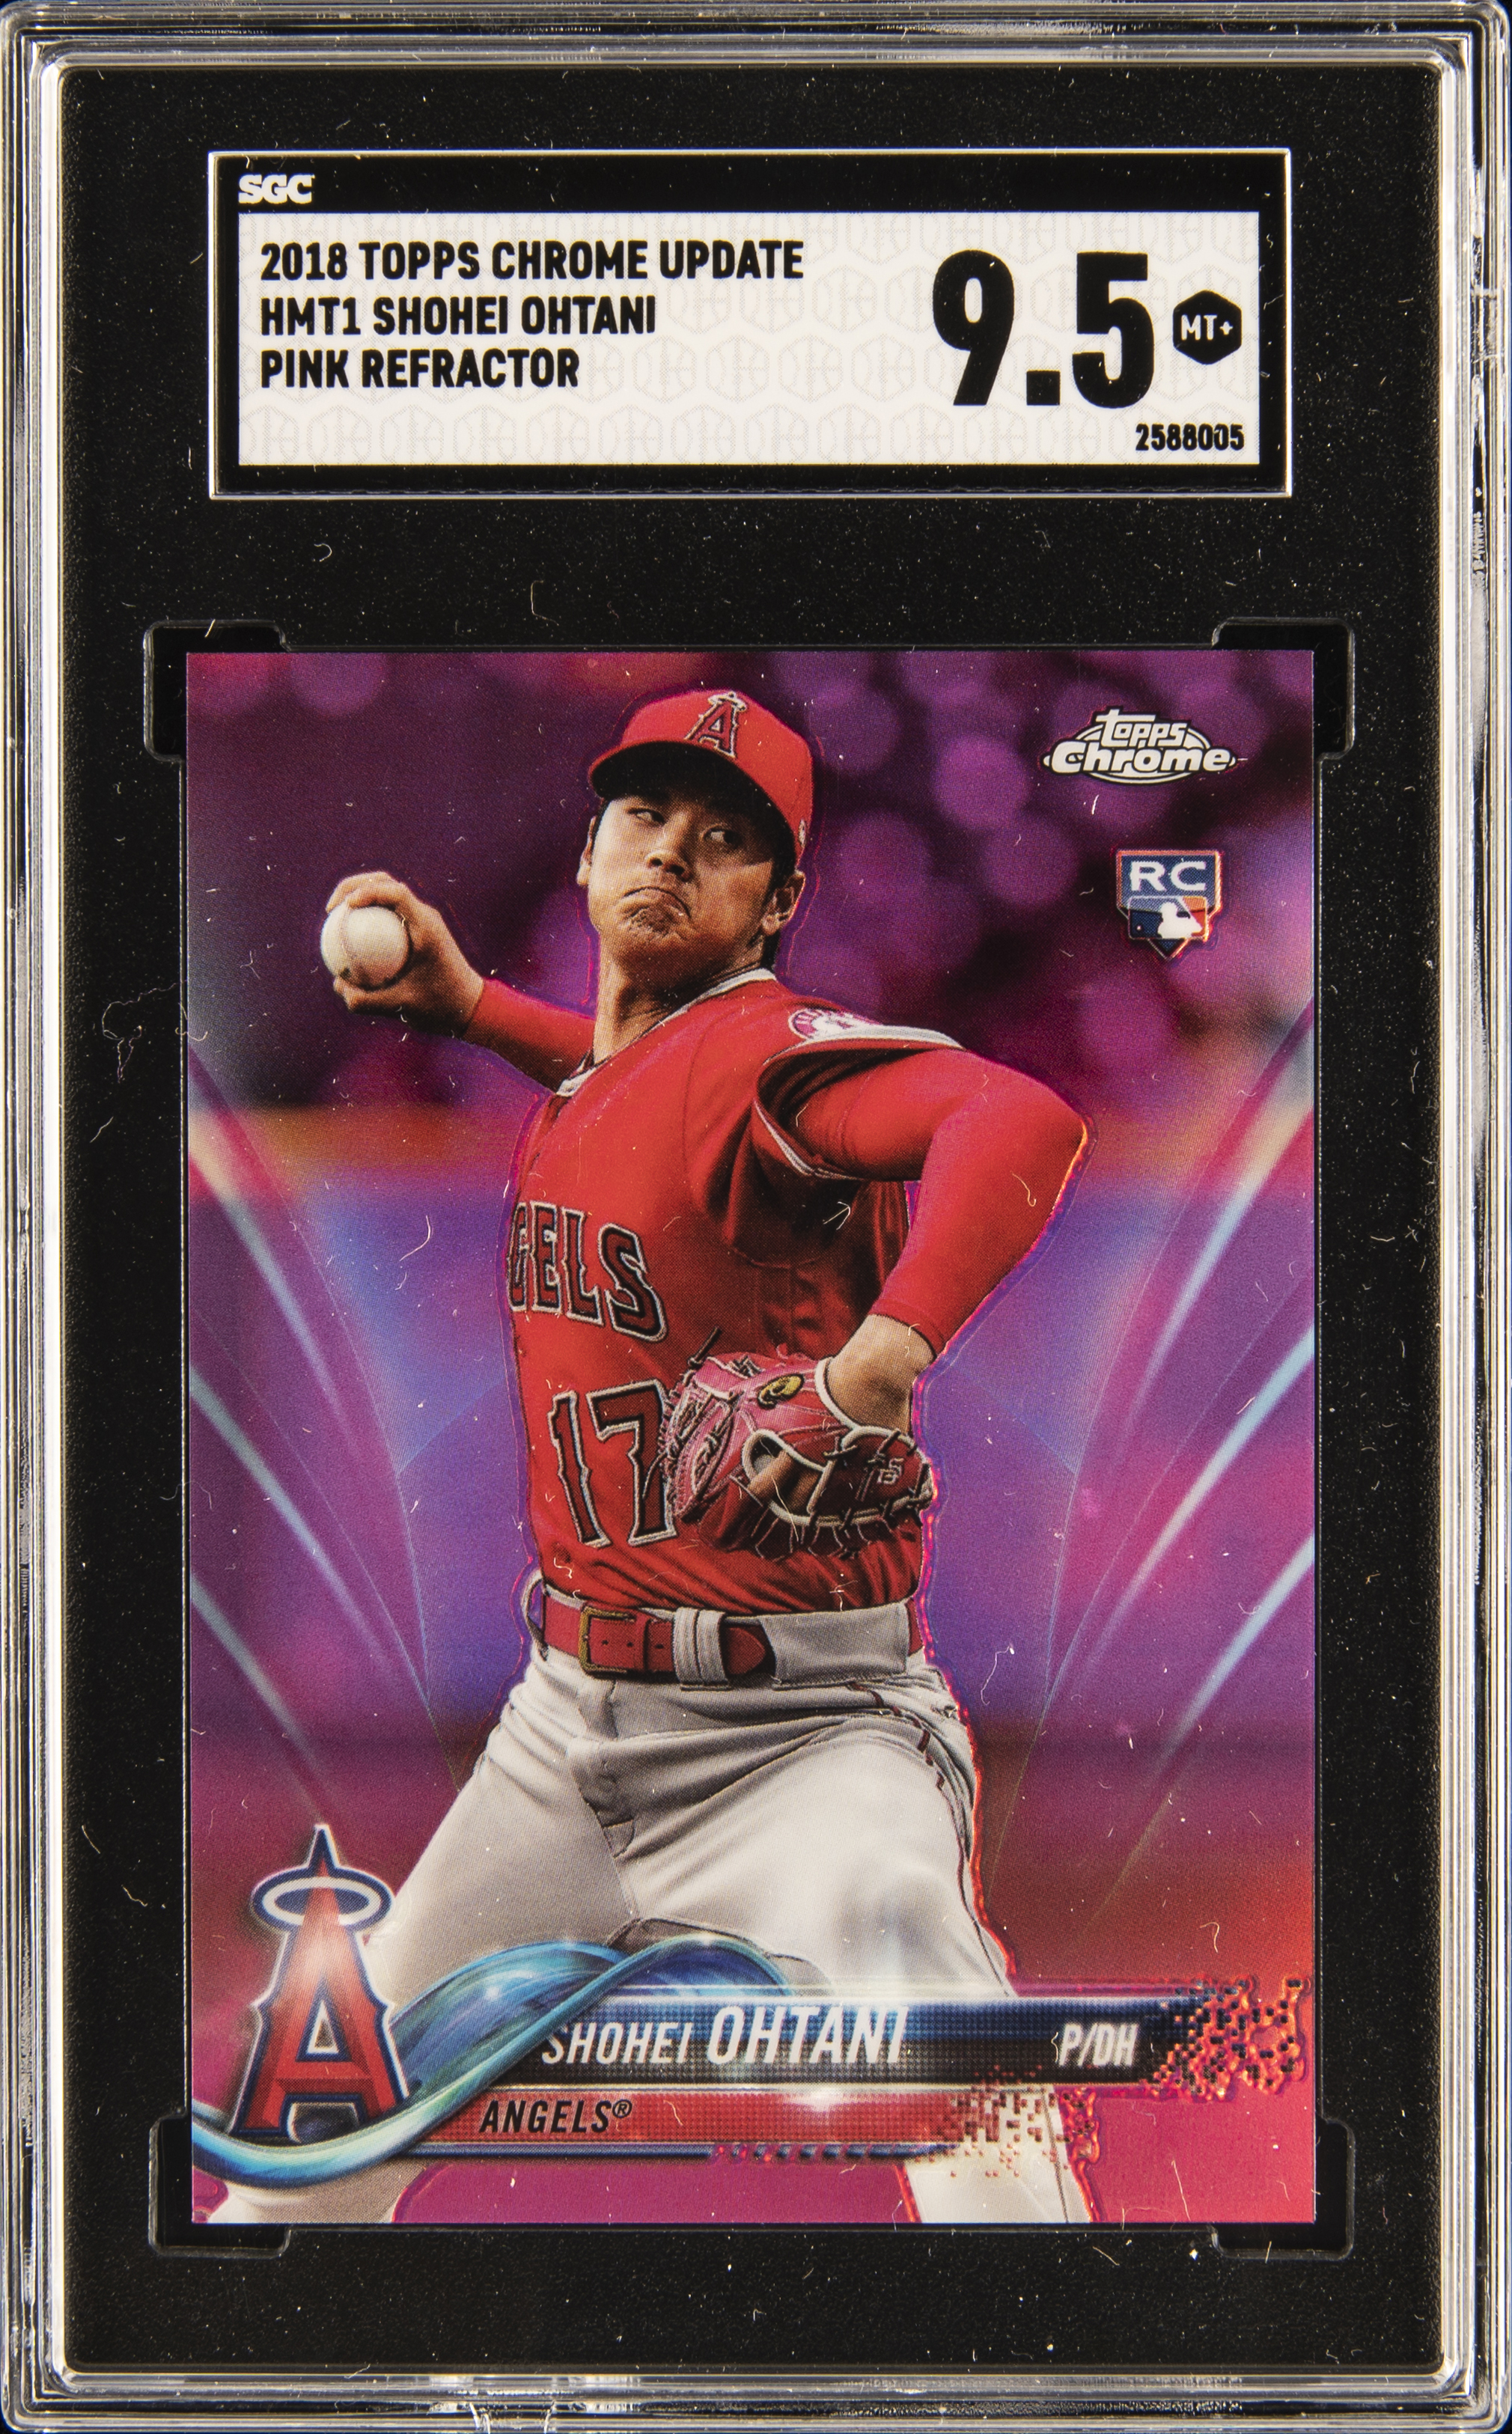 2018 Topps Chrome Update Pink Refractor #HMT1 Shohei Ohtani Rookie Card – SGC MT+ 9.5